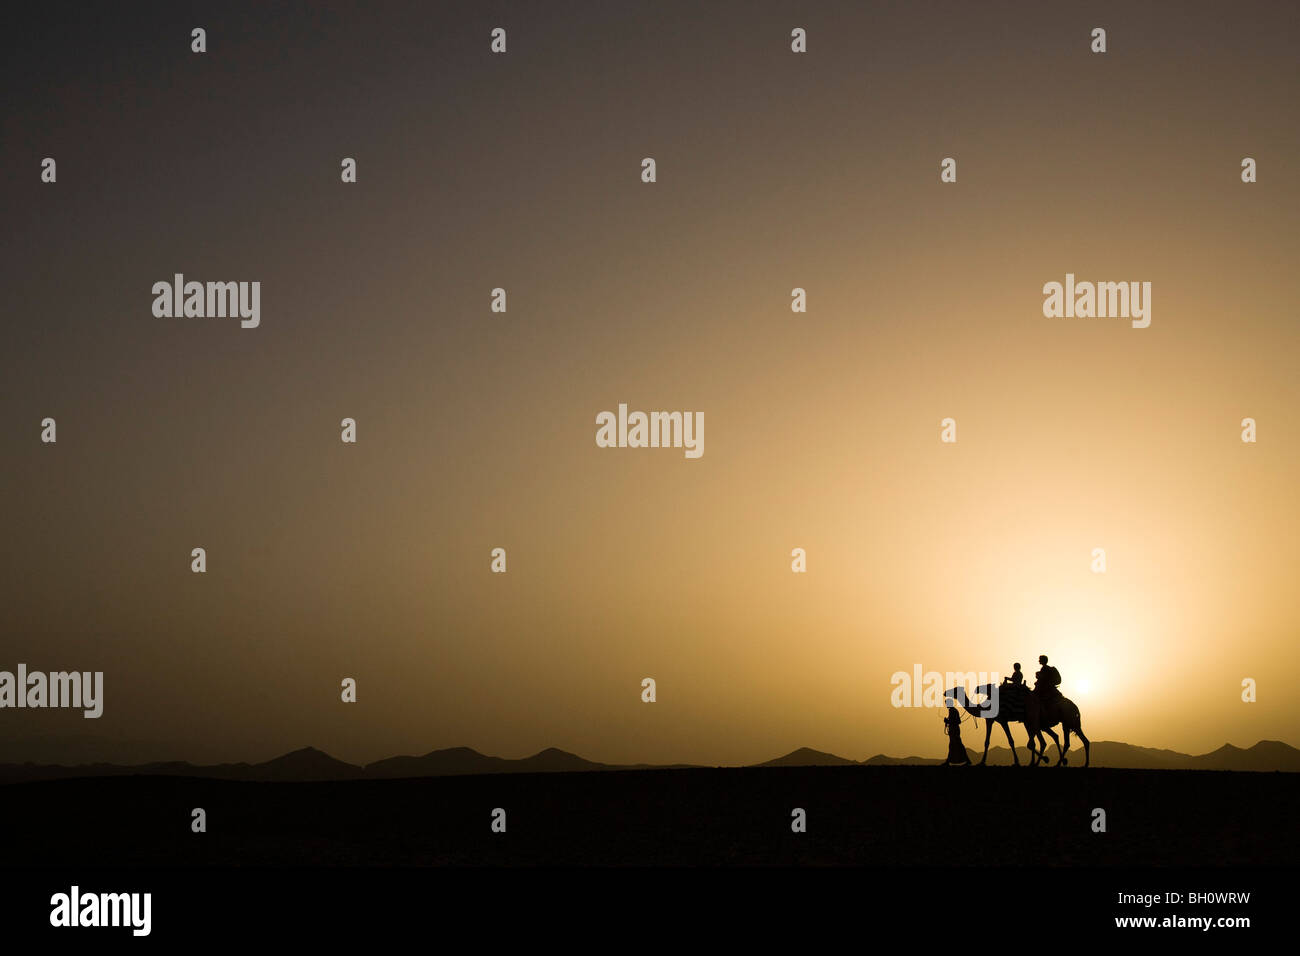 A man, a bedouin leading two camels with tourists, a mother and two children at sunset, Marsa Alam desert, Red Sea, Egypt Stock Photo